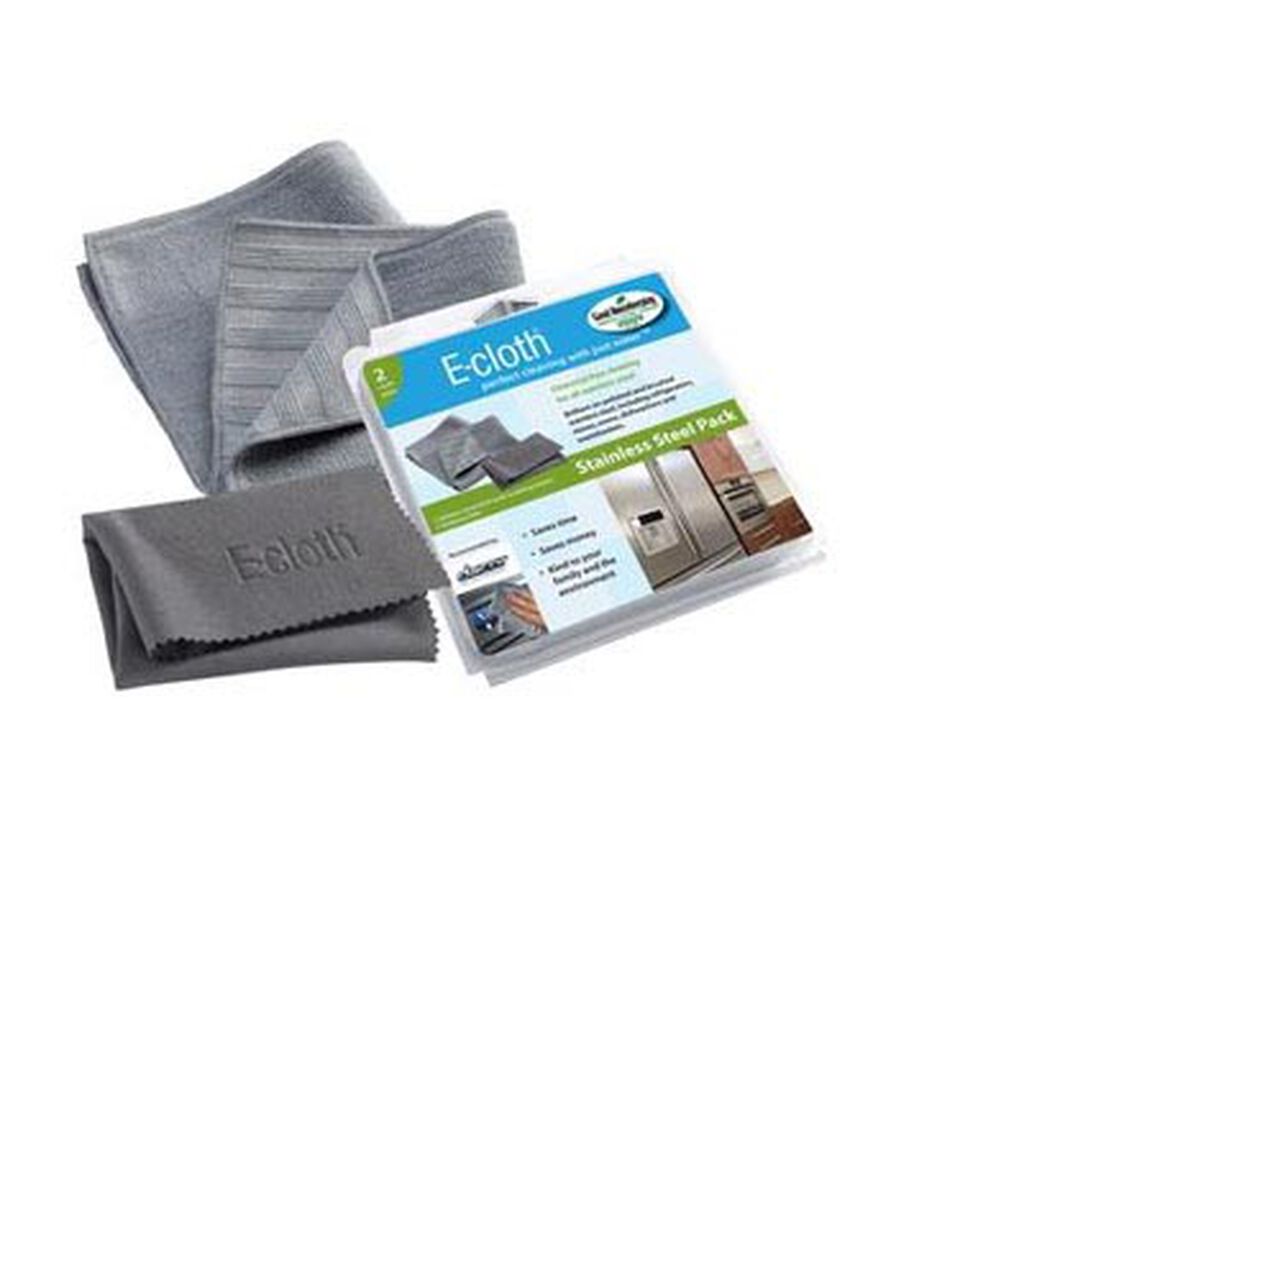 E-cloth Stainless Steel Cleaning Pads (Pack of 2) #10617, , large image number 0